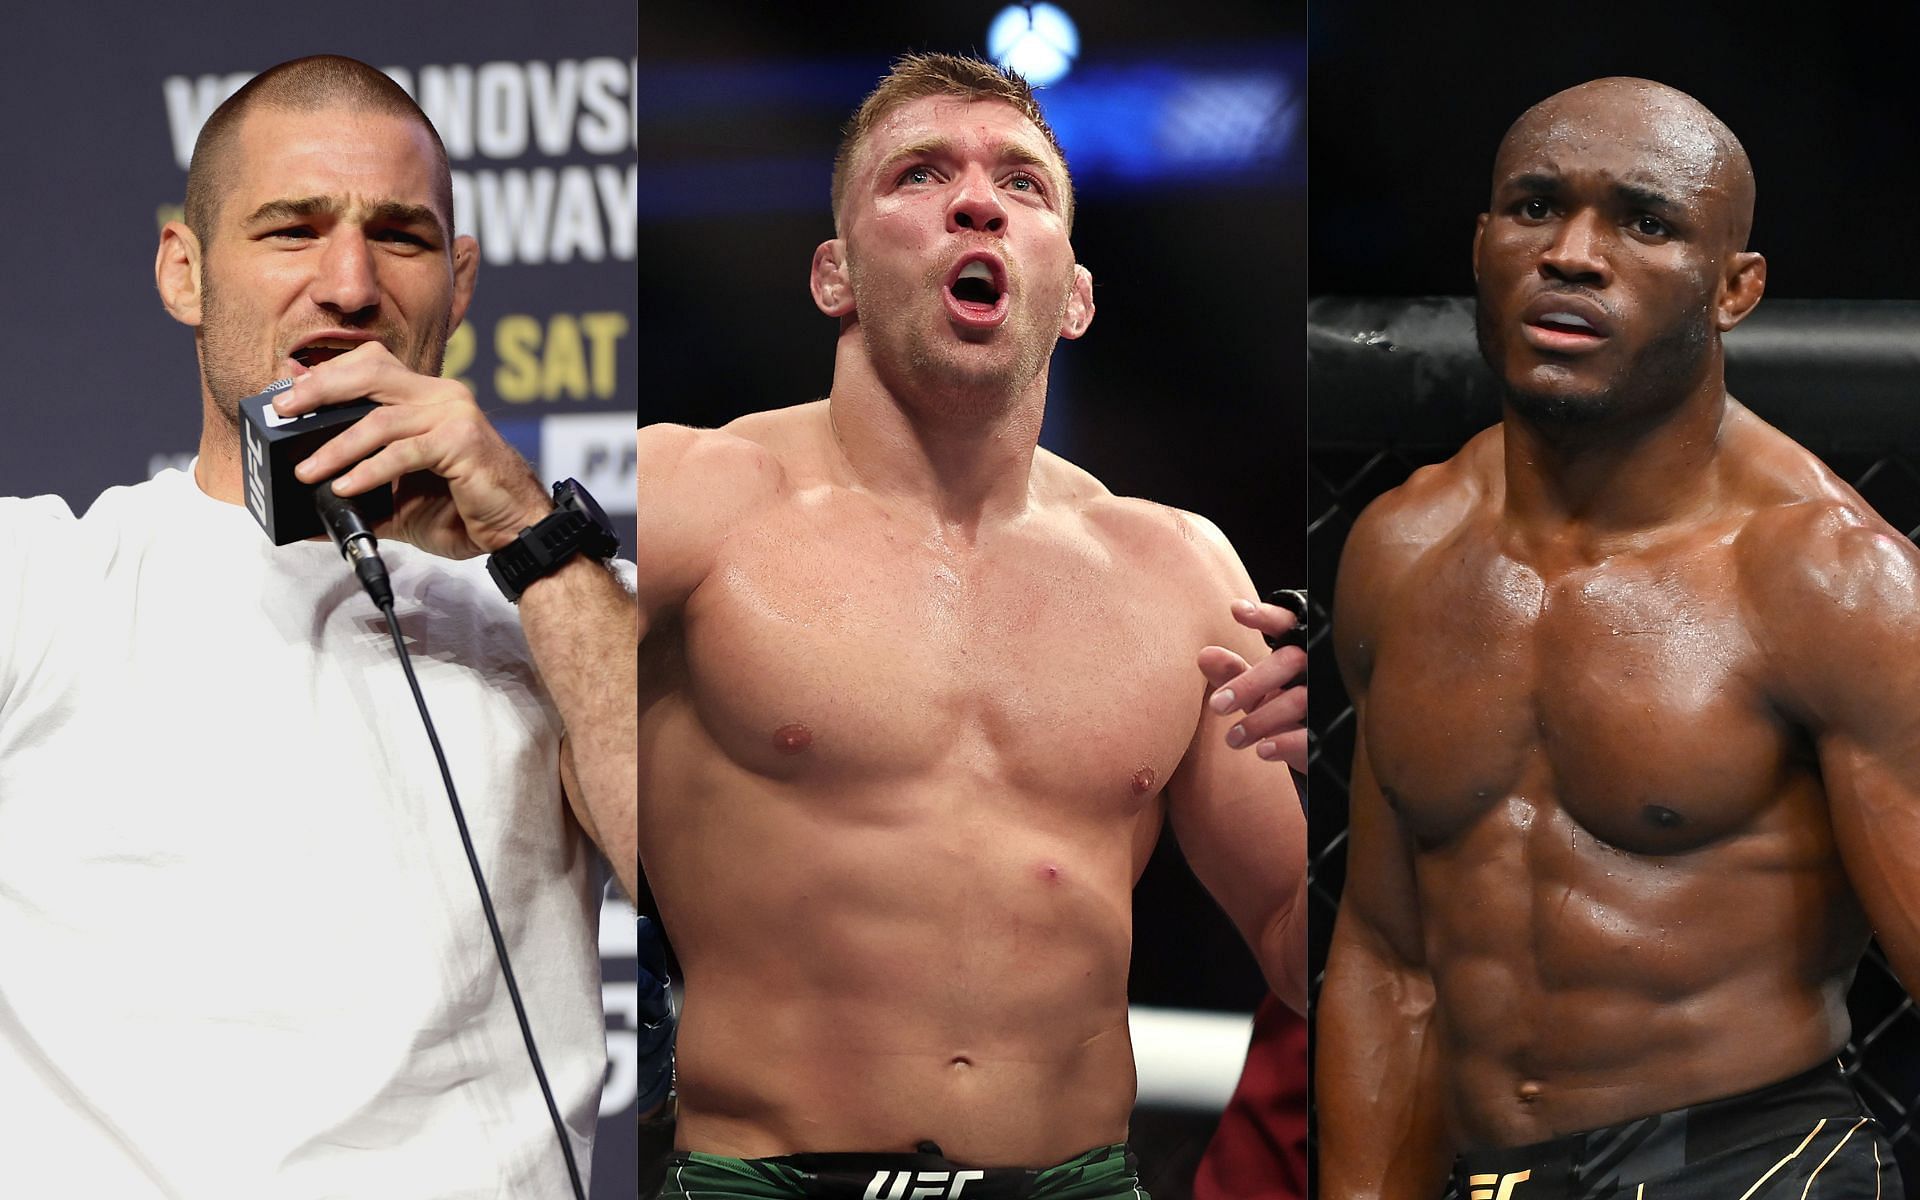 Sean Strickland (left), Dricus Du Plessis (center), and Kamaru Usman (right) (Image credits Getty Images)